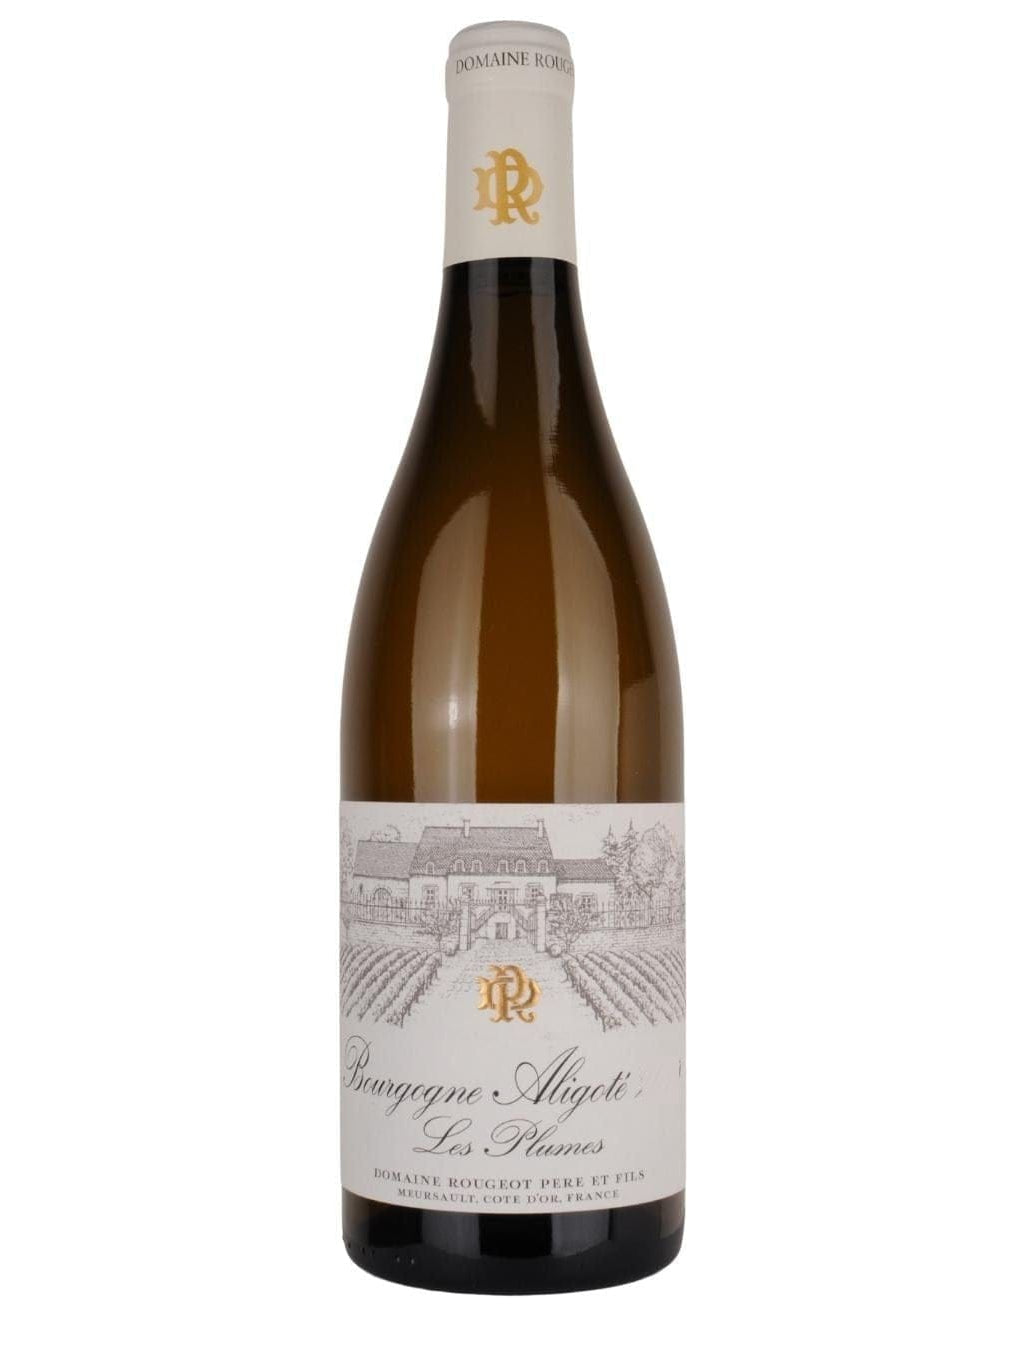 Shop Domaine Rougeot Père & Fils Domaine Rougeot Père et Fils Bourgogne Aligoté Les Plumes 2020 online at PENTICTON artisanal French wine store in Hong Kong. Discover other French wines, promotions, workshops and featured offers at pentictonpacific.com 